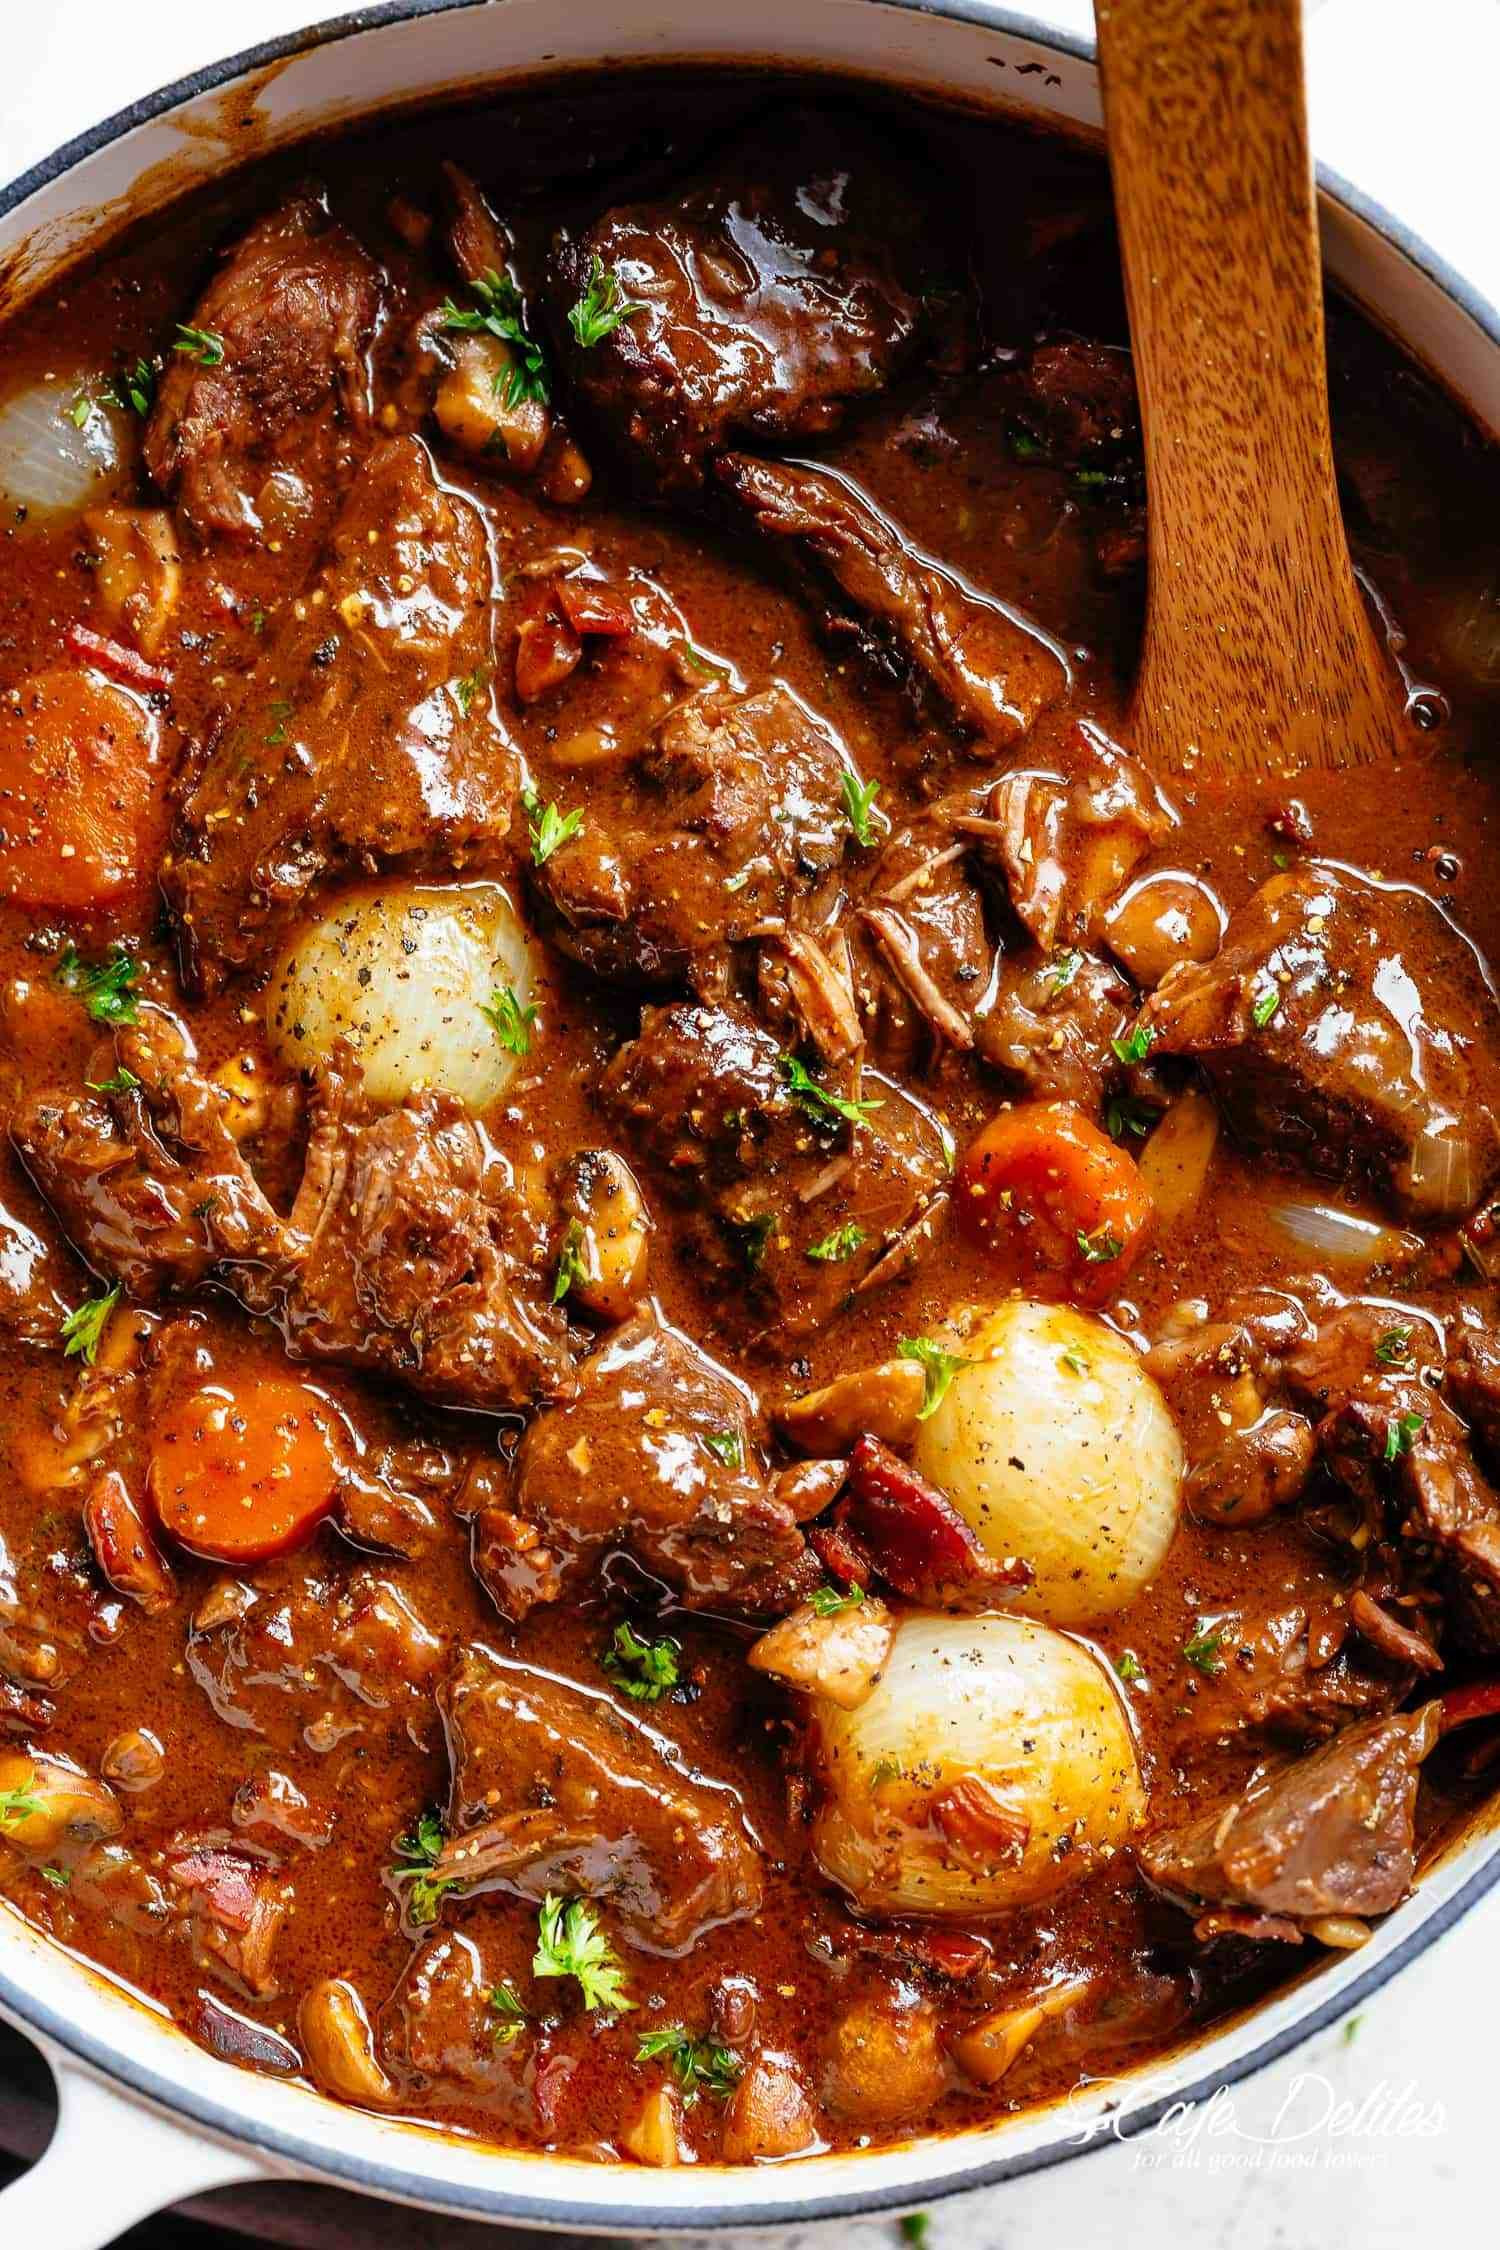 Lamb Stew Julia Child
 Tender fall apart chunks of beef simmered in a rich red